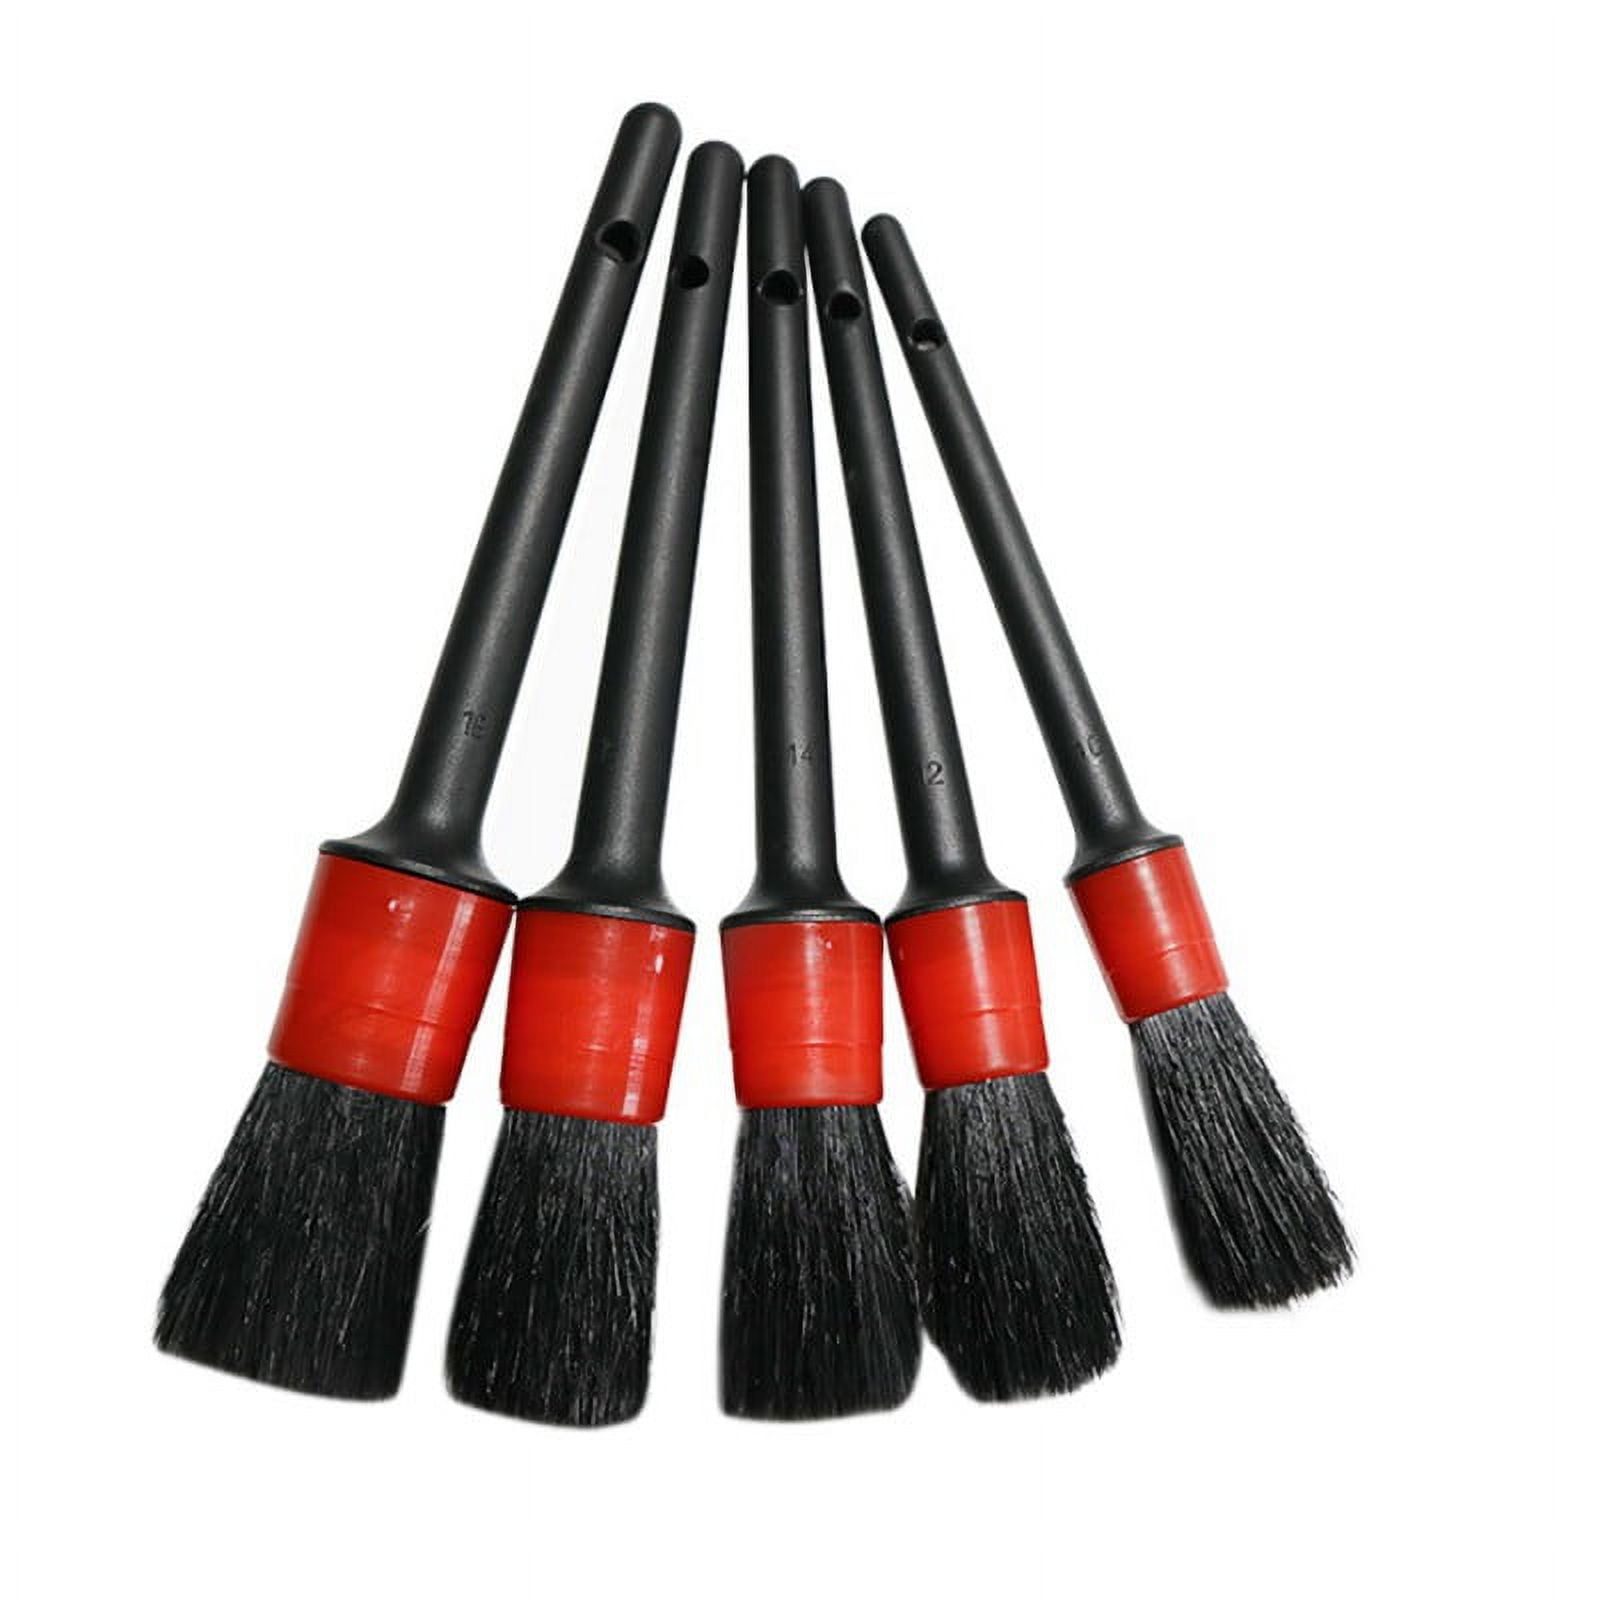  Detail Factory - Crevice Mini Detailing Brush Combo Kit - One  Boar's Hair Brush + One Ultra-Soft Synthetic Brush, Heavy Cleaning Action  for Small Spaces, Red (Blonde Boar Hair) + Black (